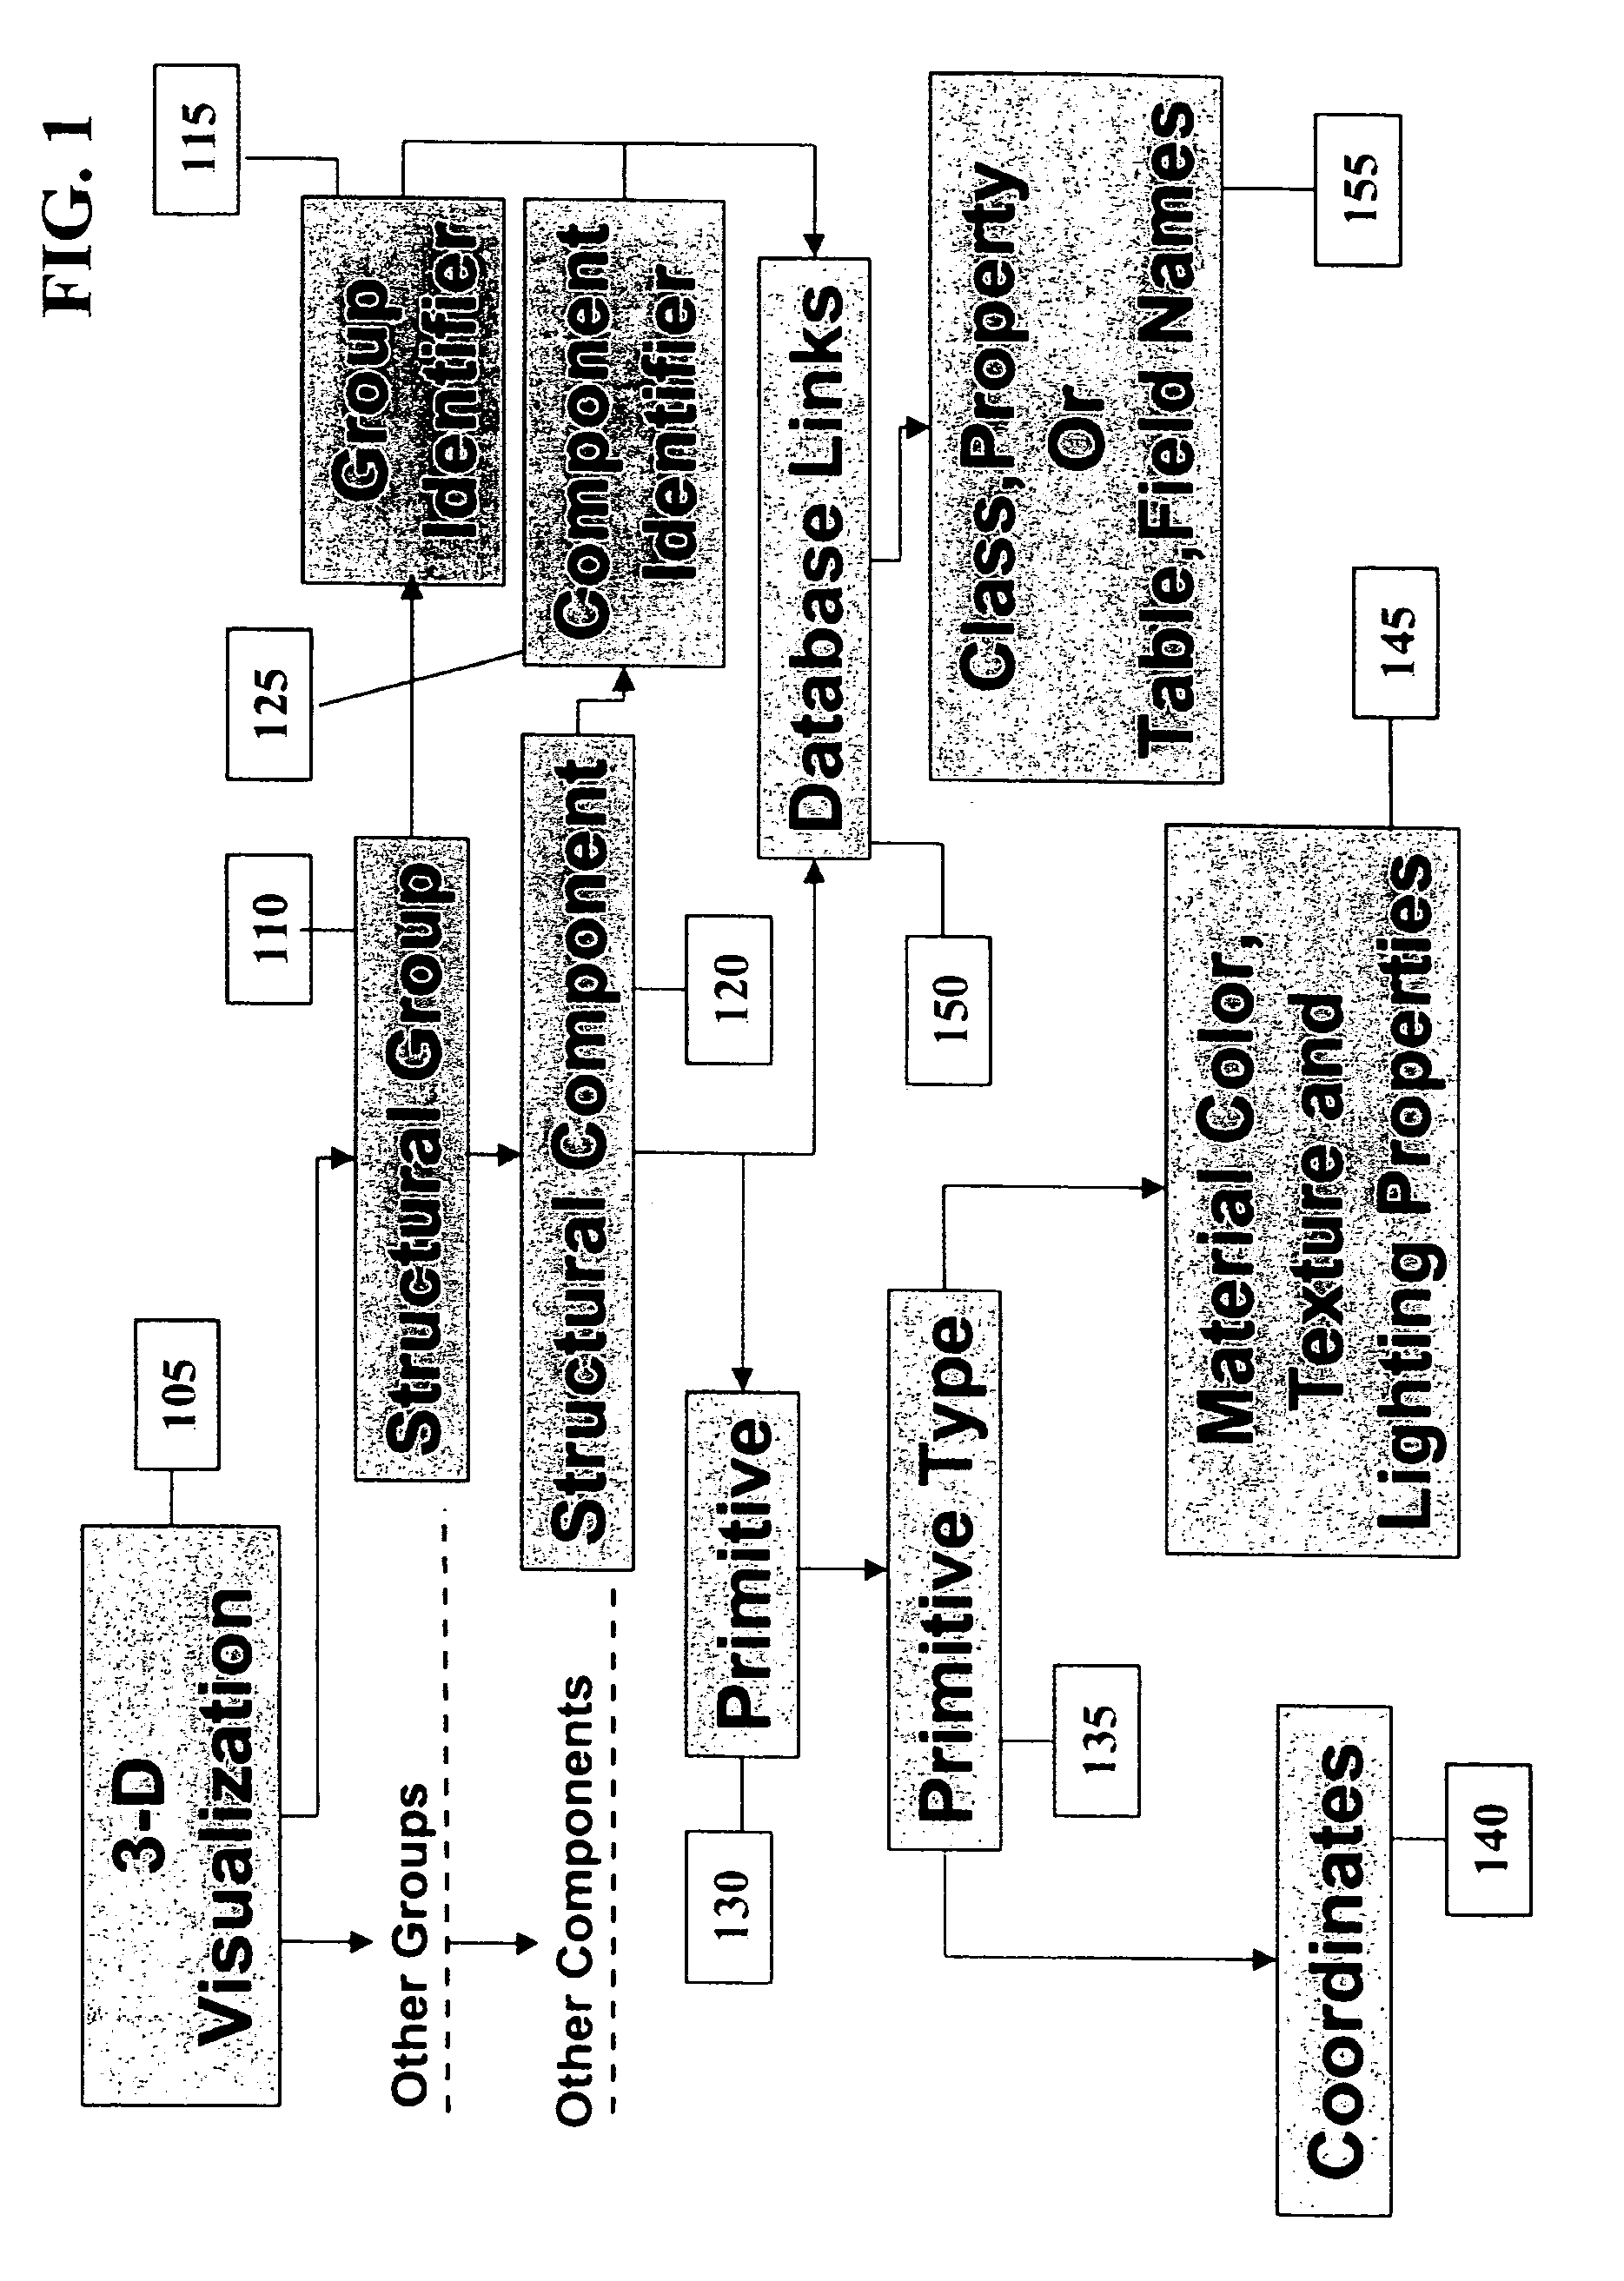 Multimedia inspection database system (MIDaS) for dynamic run-time data evaluation